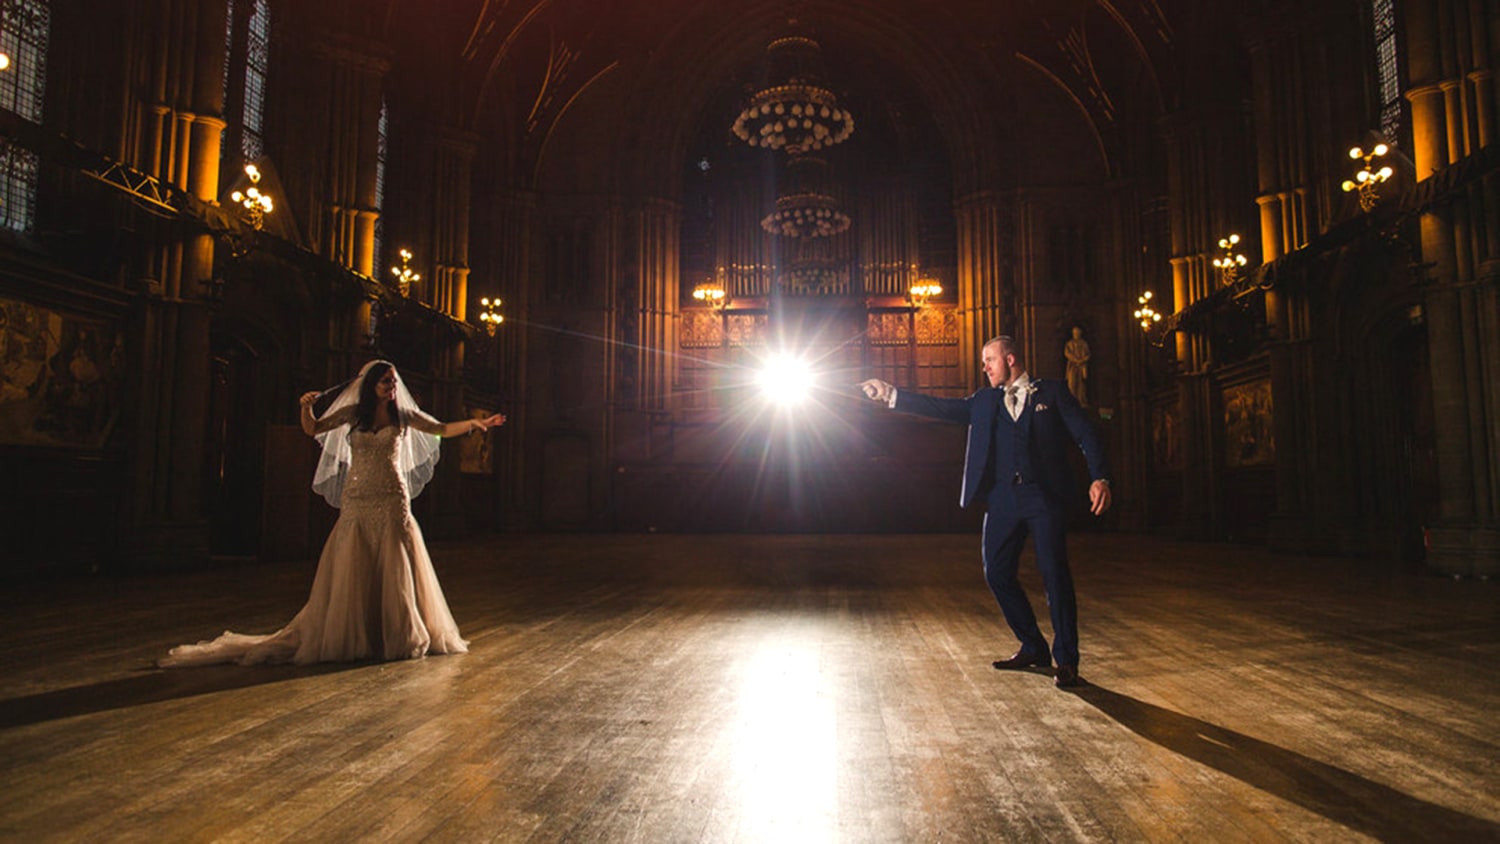 Photos of 'Harry Potter' Wedding Looks Like It Was Held at Hogwarts